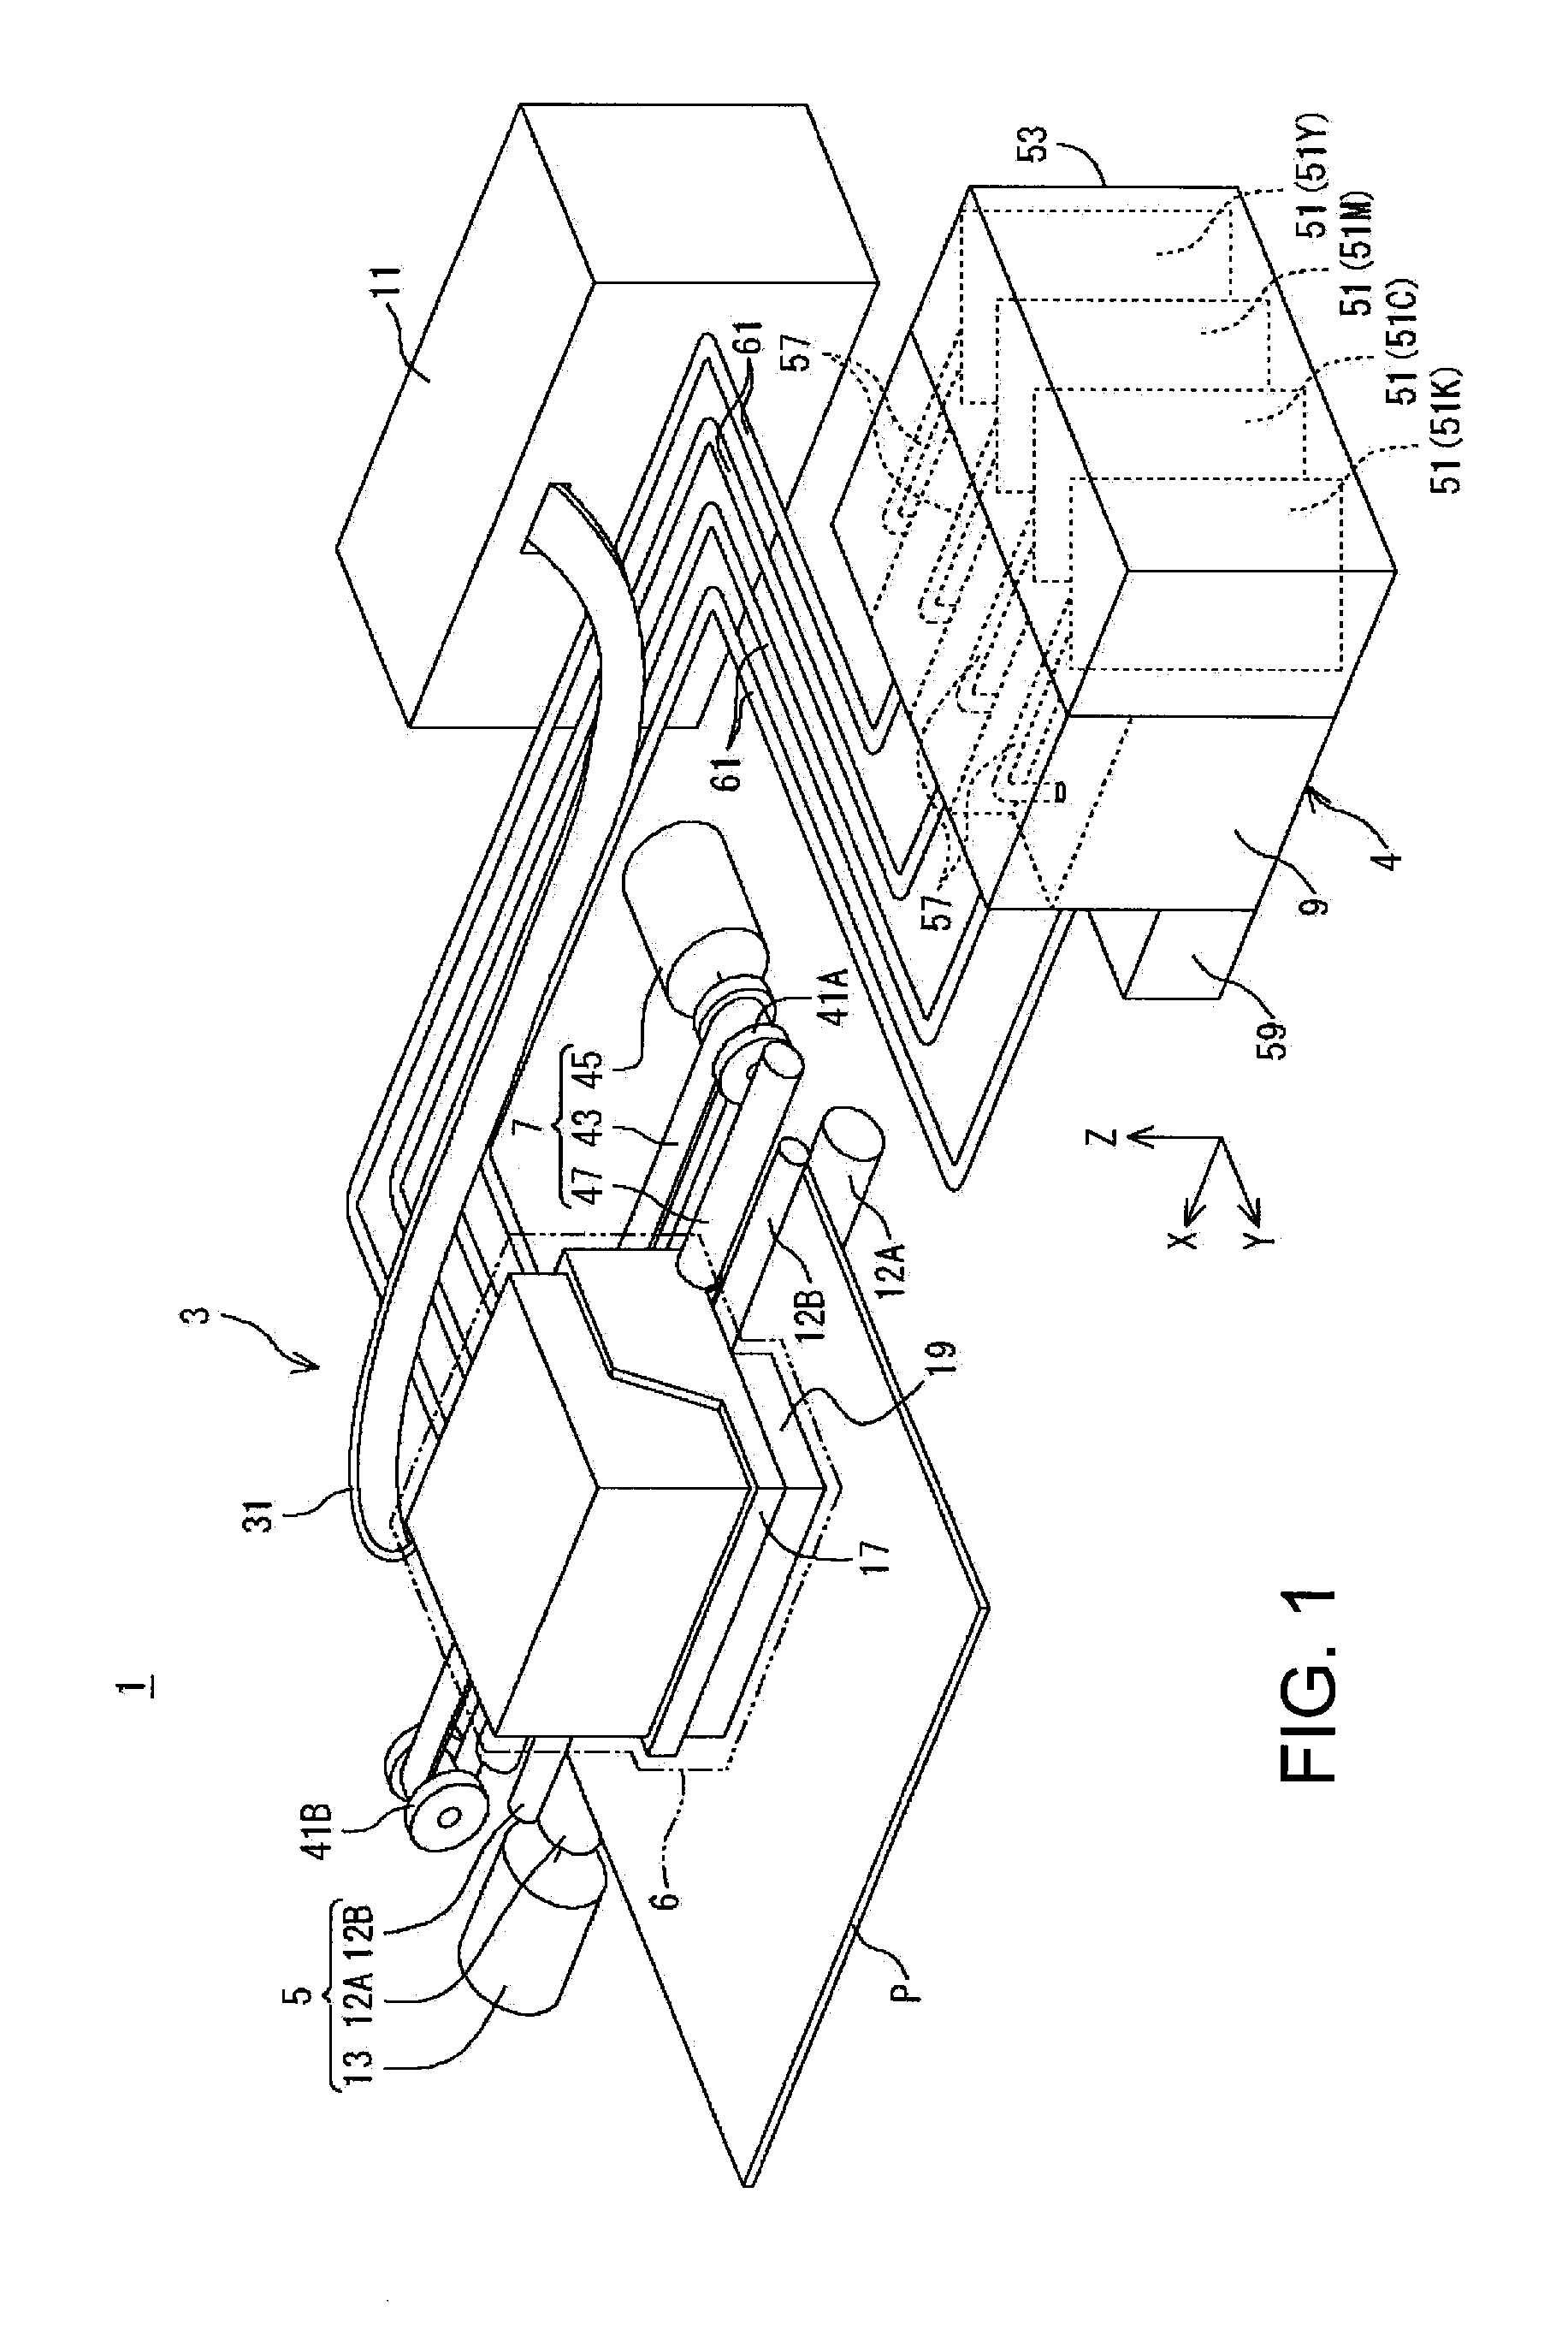 Packaging tray and packaging body